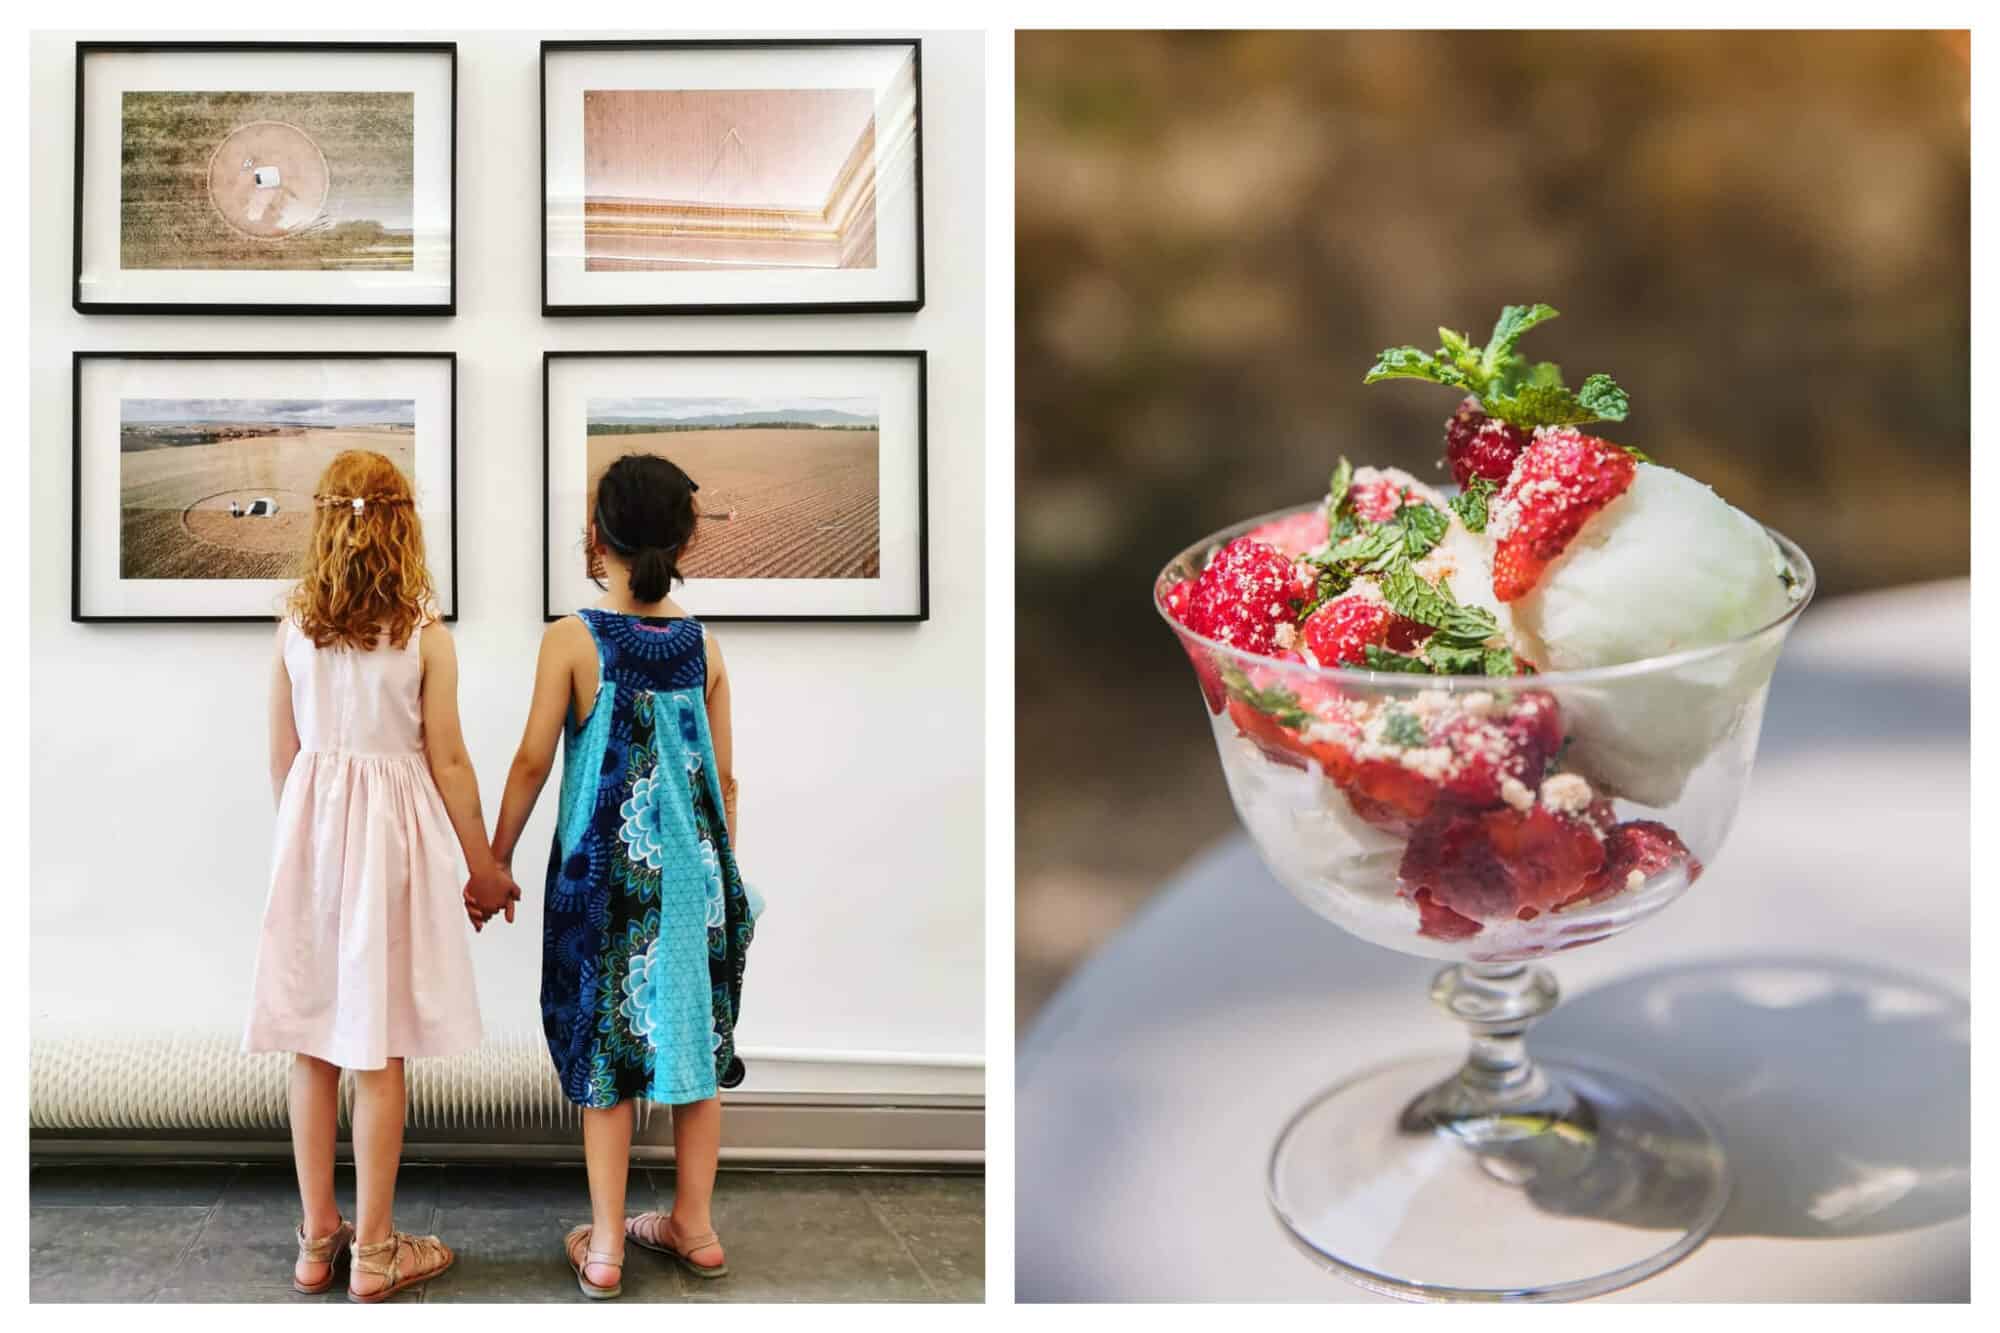 Left: Two girls hold hands while looking at art in the culture space of the Hôtel de Gallifet, Right: A refreshing bowl of strawberries and vanilla ice cream sits on a table at the Hôtel de Gallifet